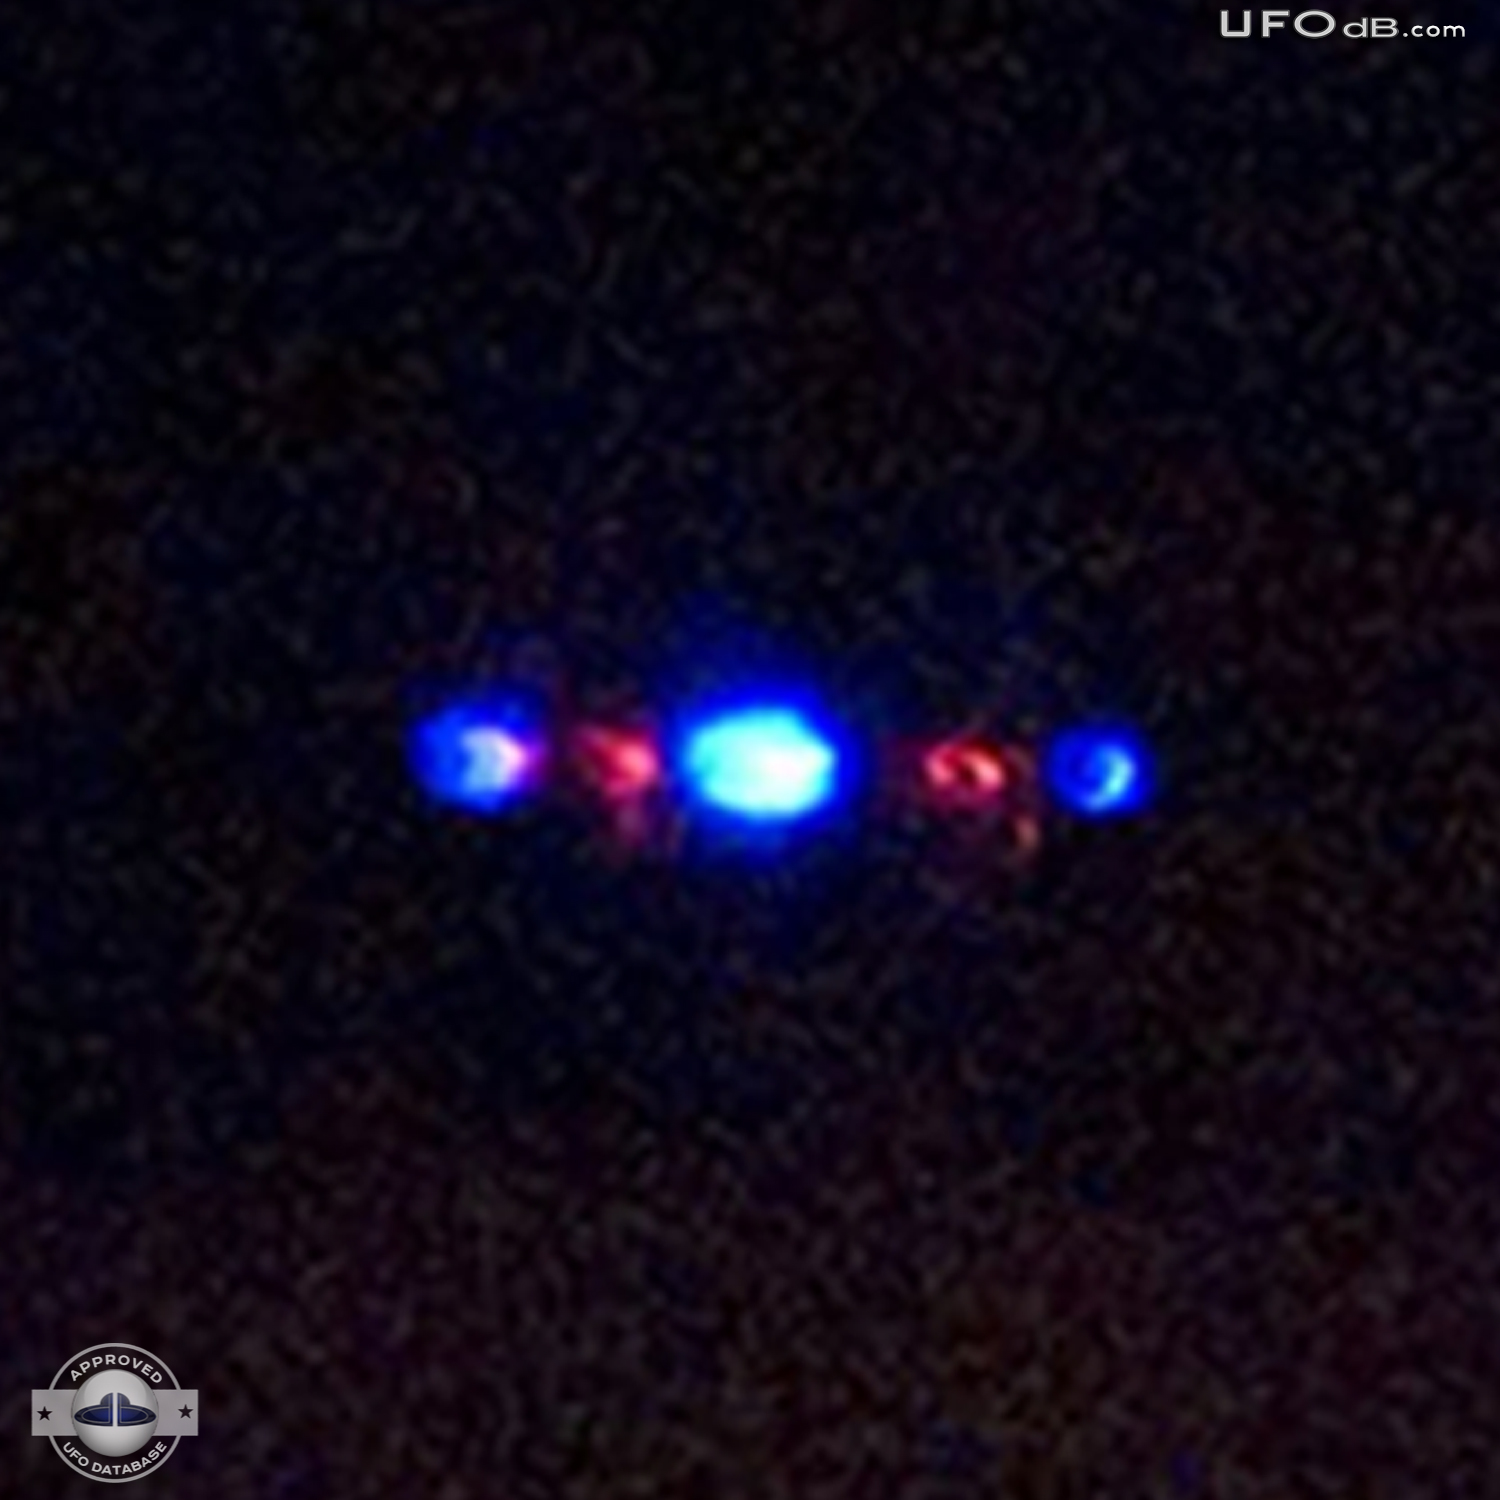 People from Manitoba witnesses a UFO landing on their fields June 2011 UFO Picture #355-5